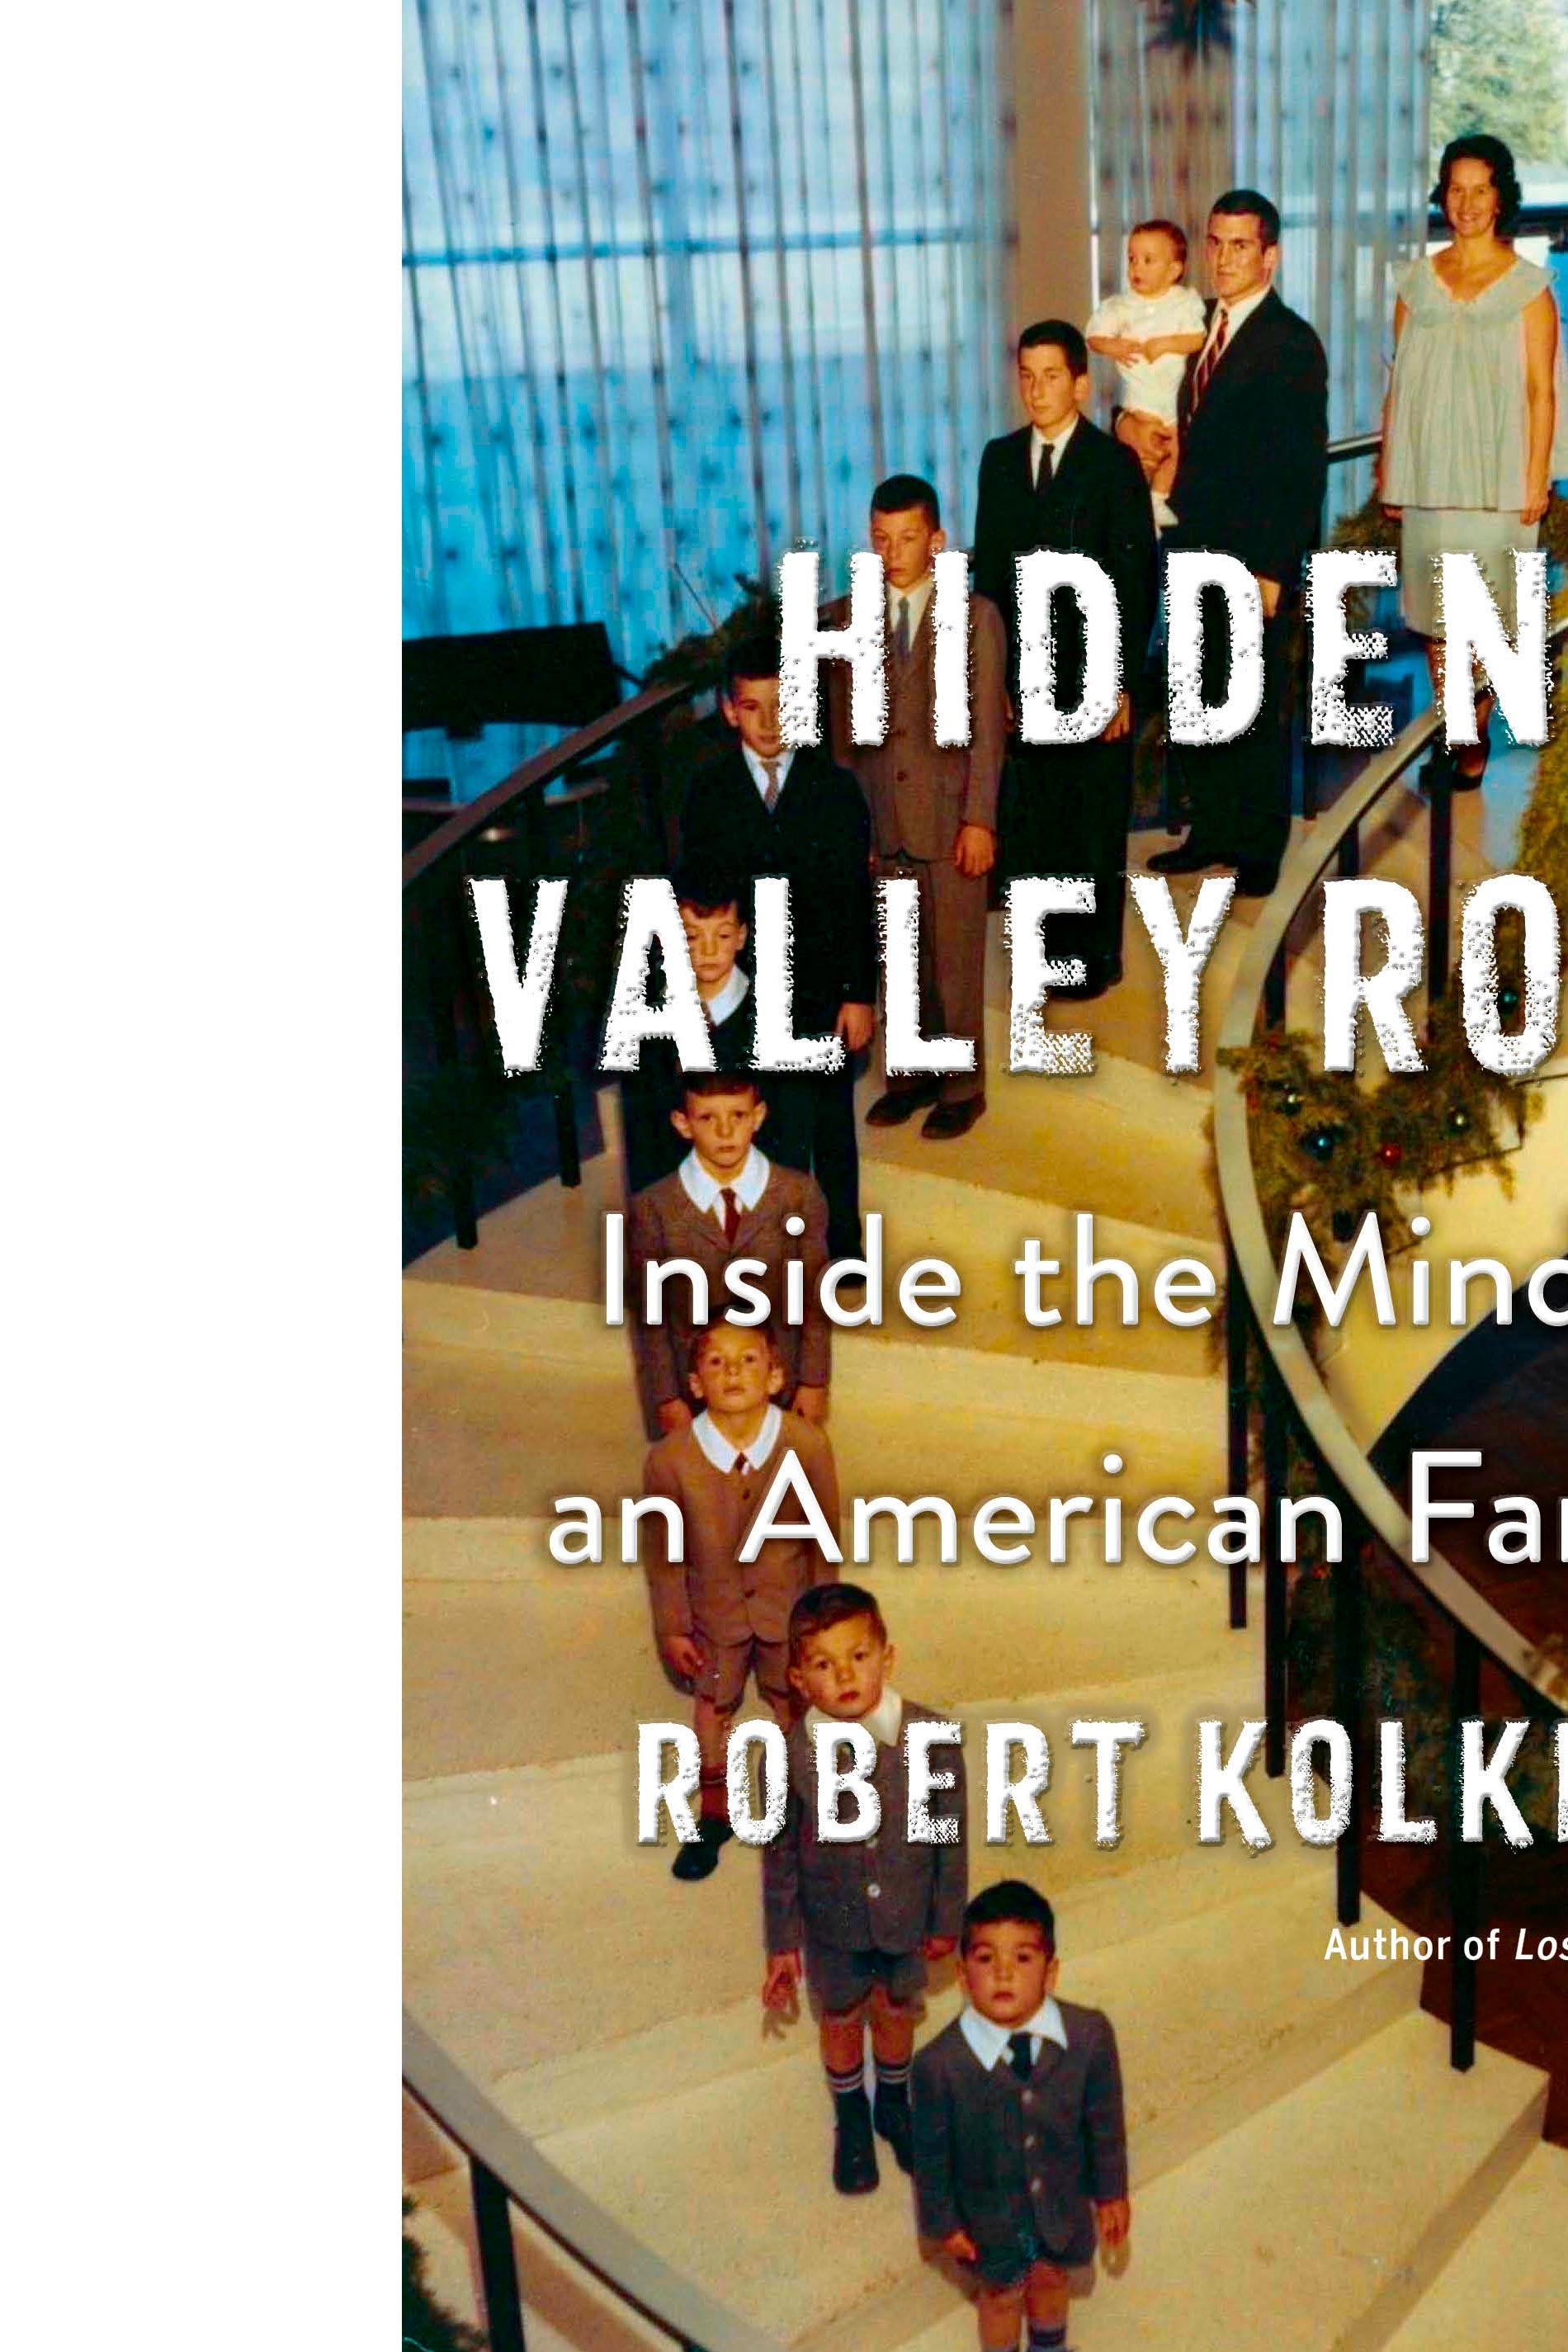 Hidden Valley Road book cover, an illustration of a large well-dressed white family descending a spiral staircase